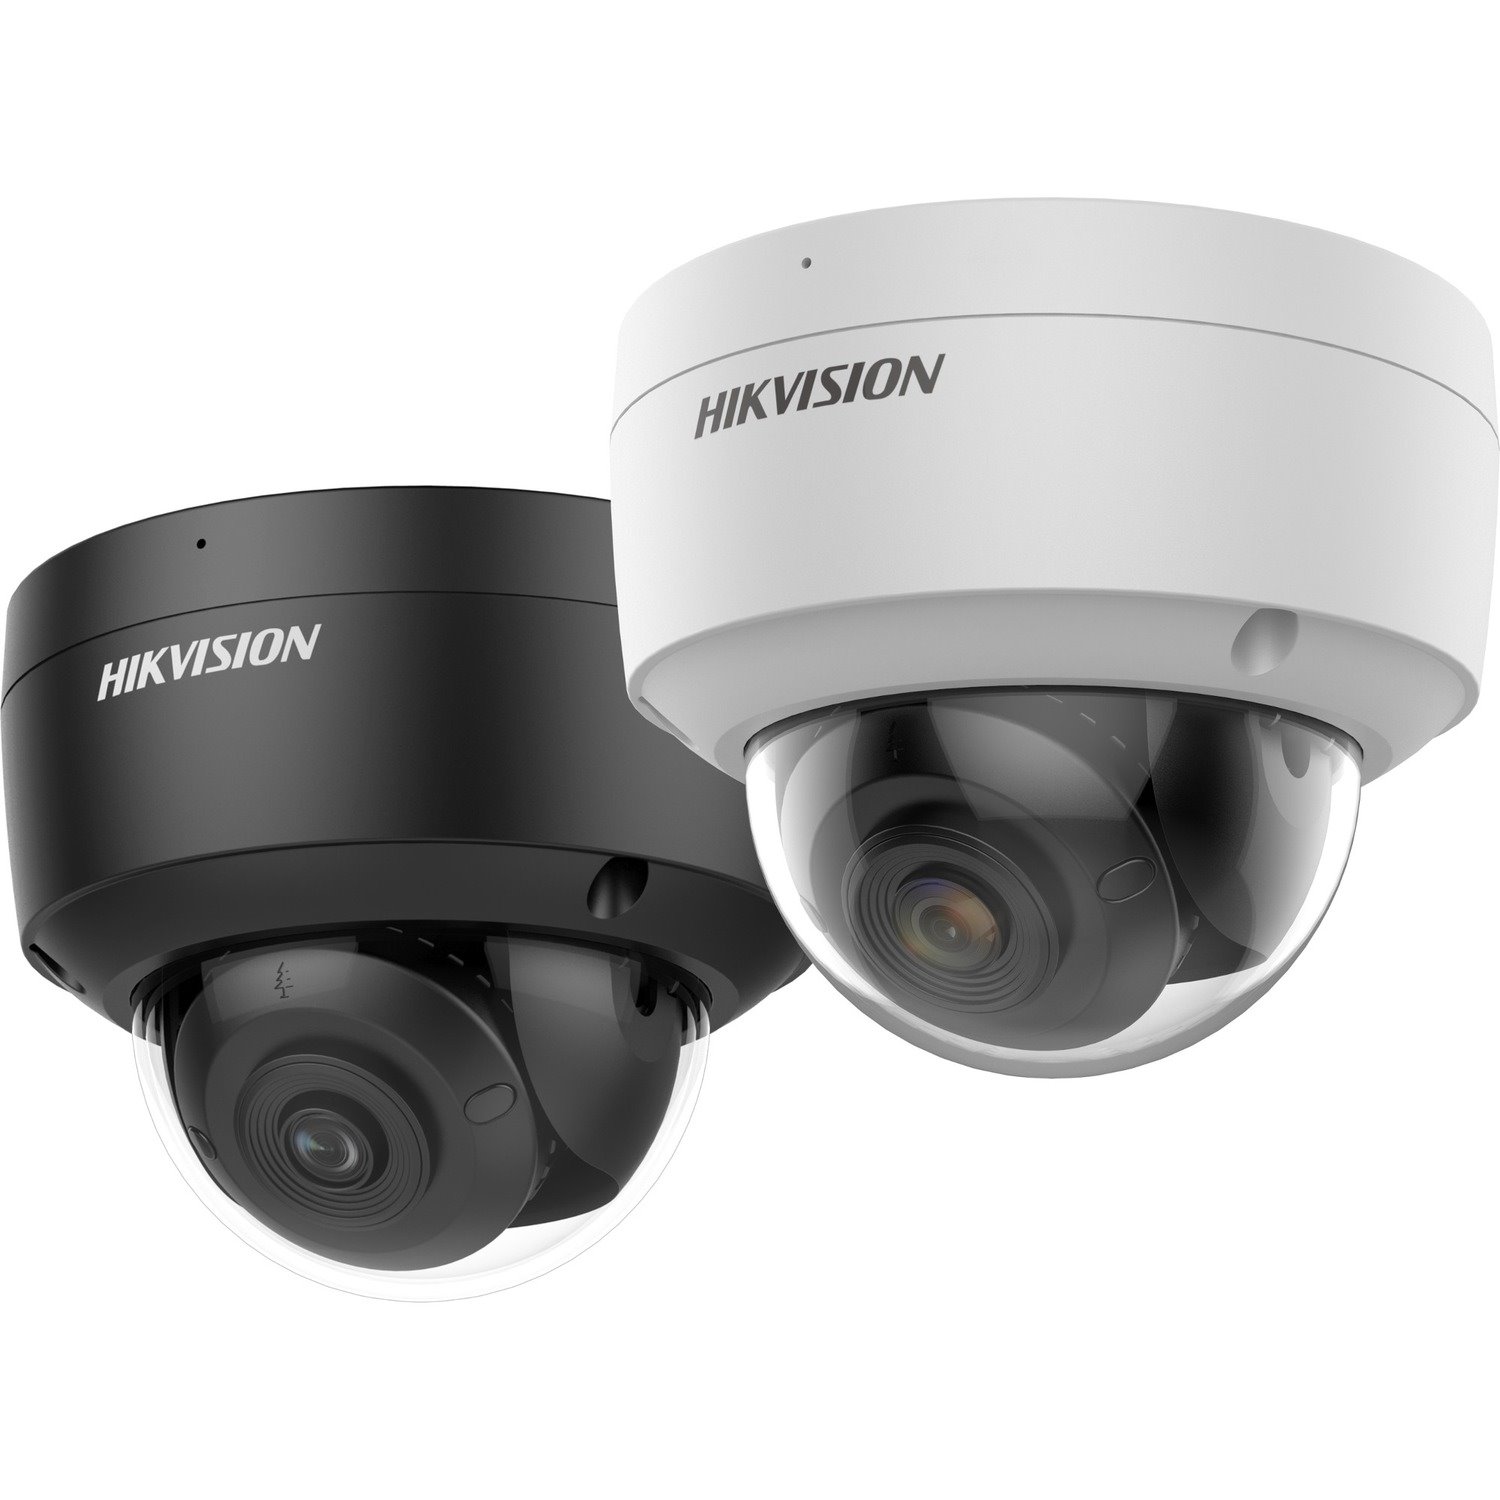 Hikvision EasyIP DS-2CD2147G2-SU 4 Megapixel Network Camera - Color - Dome